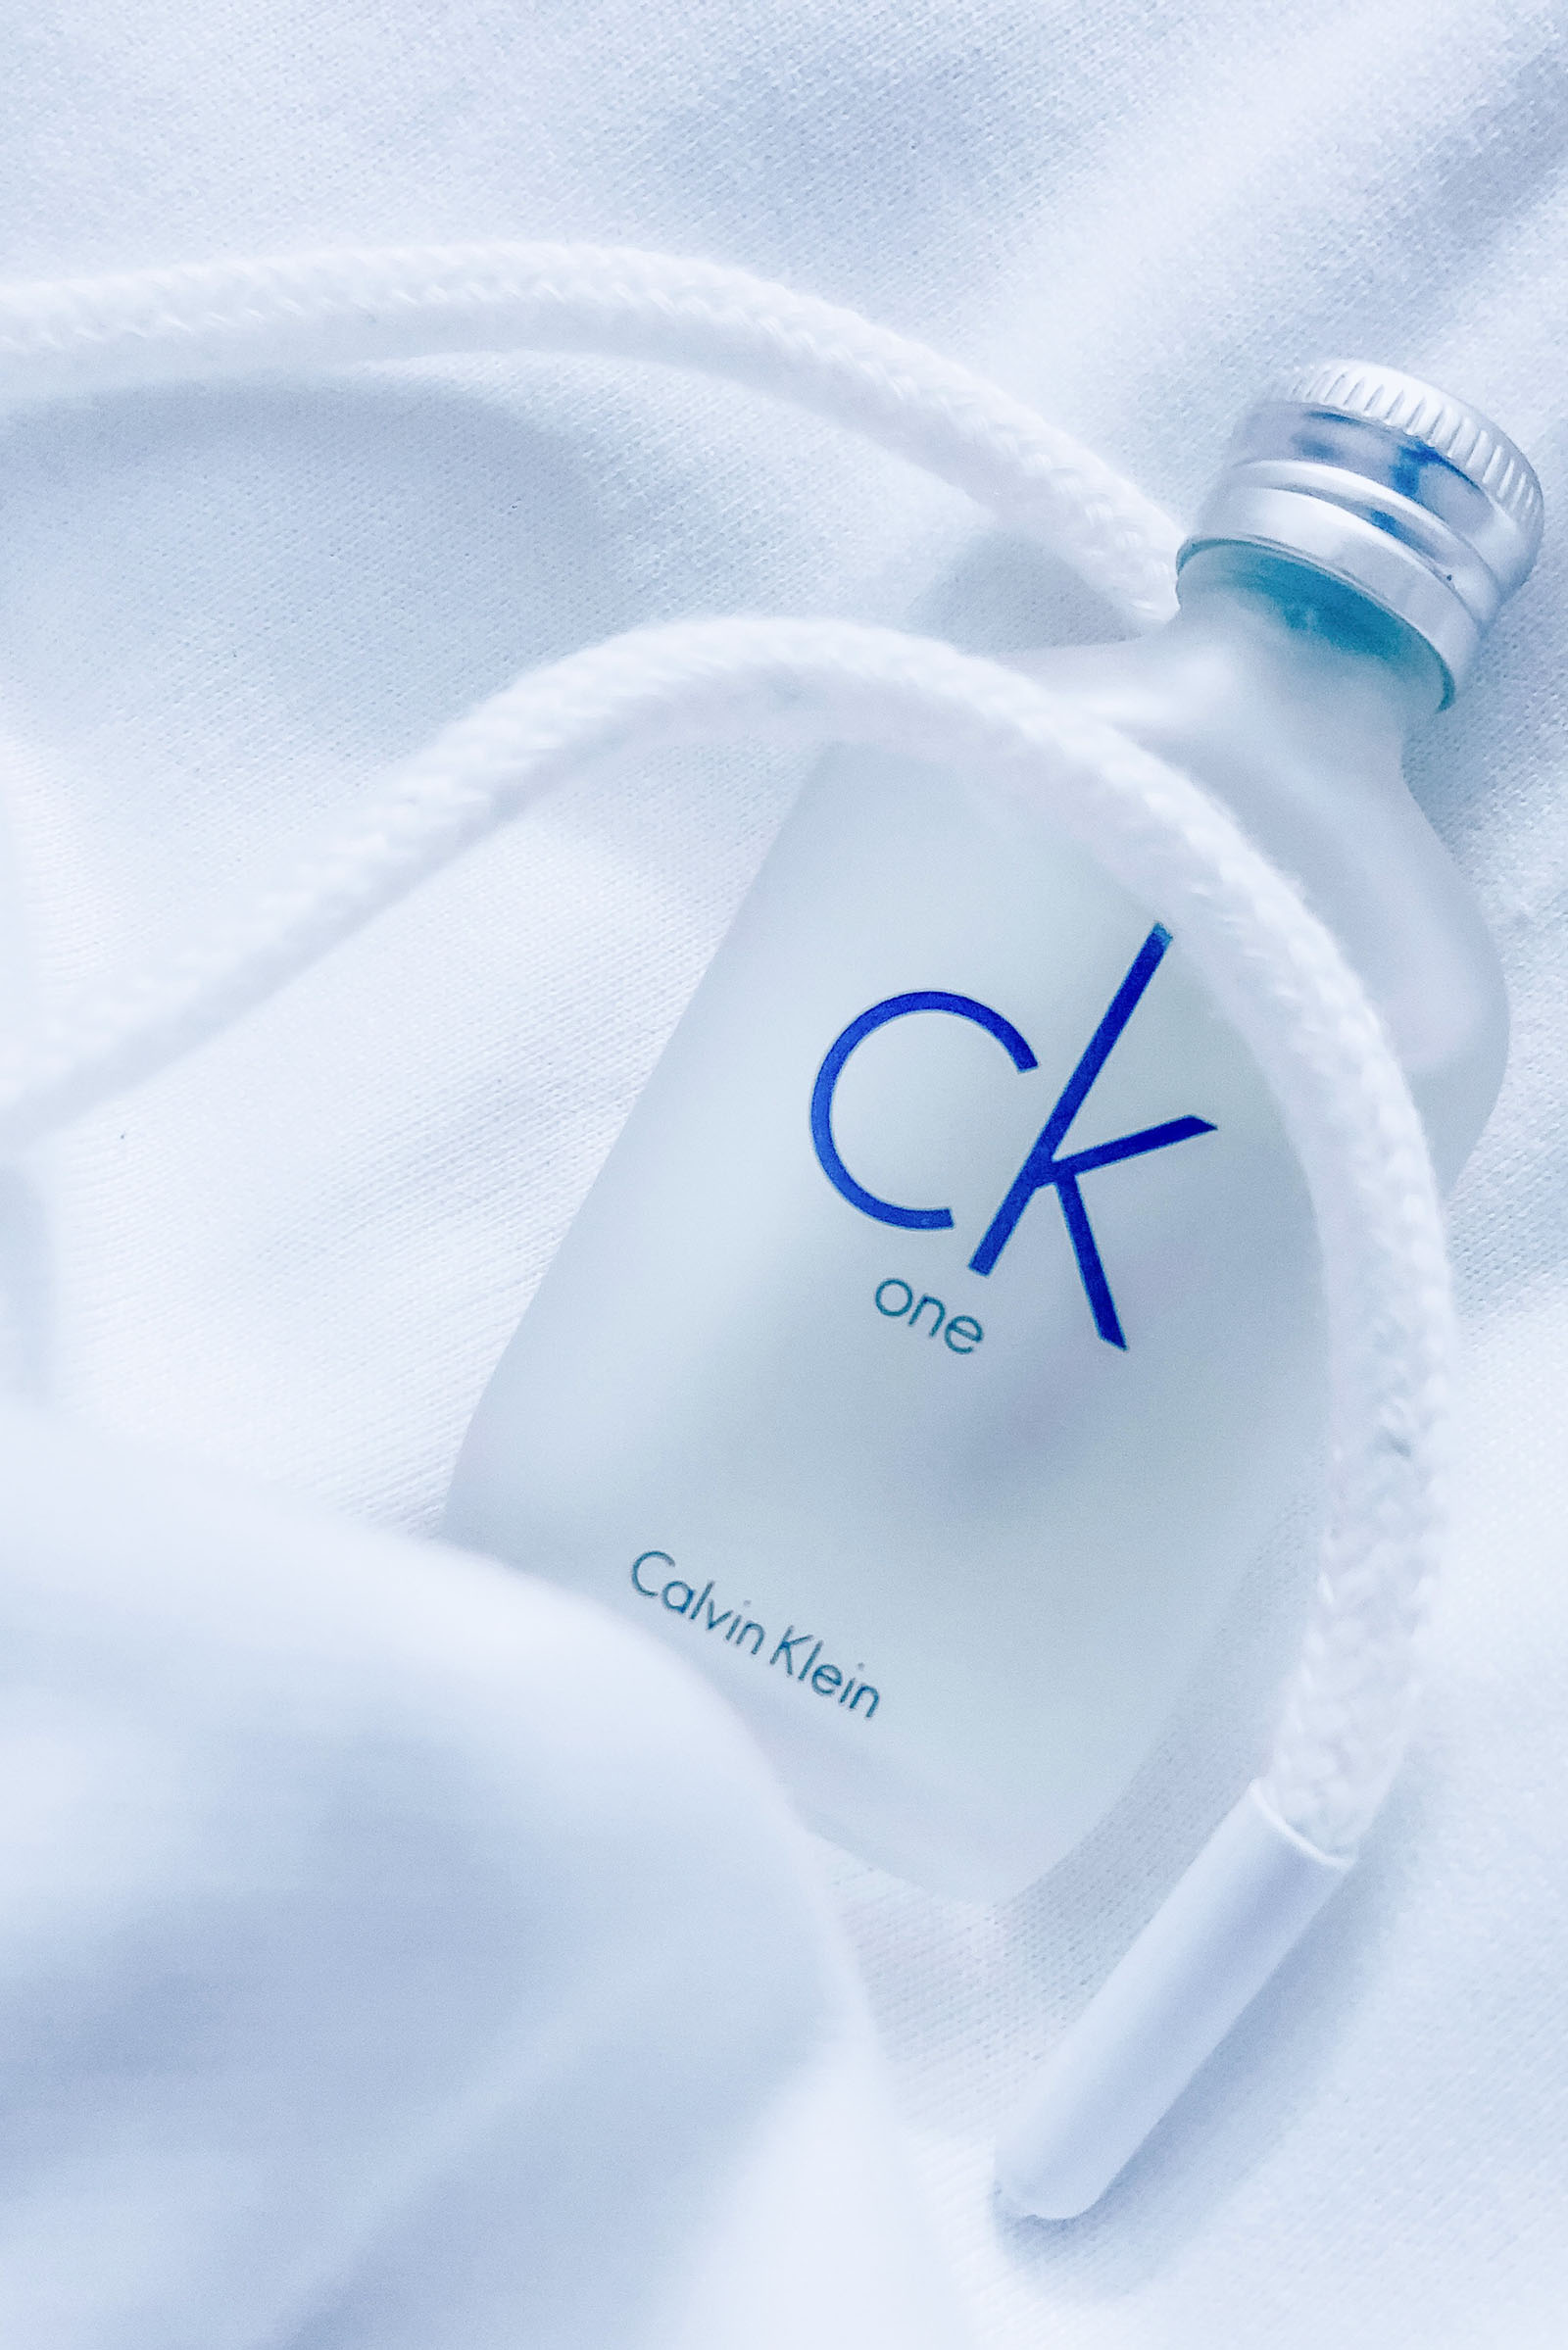 CK one is best unisex fragrance